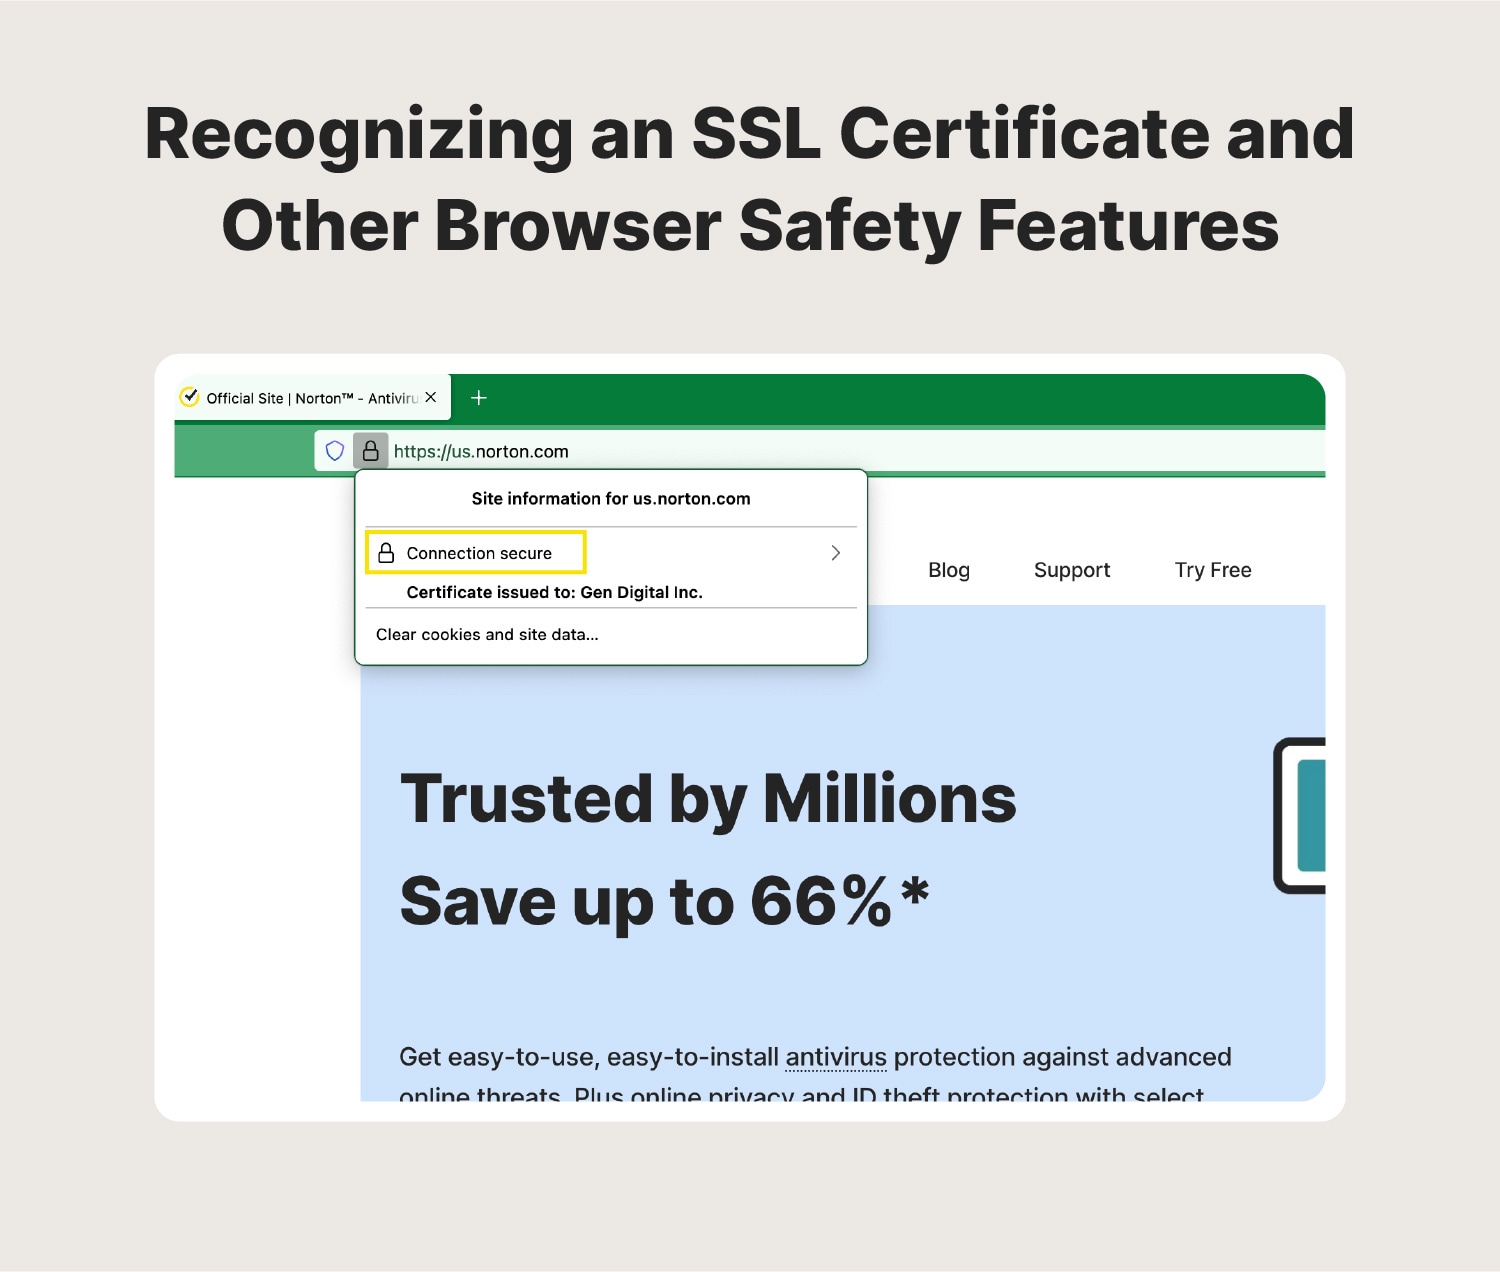 Image showing the SSL certificate and other safety information when using a web browser.